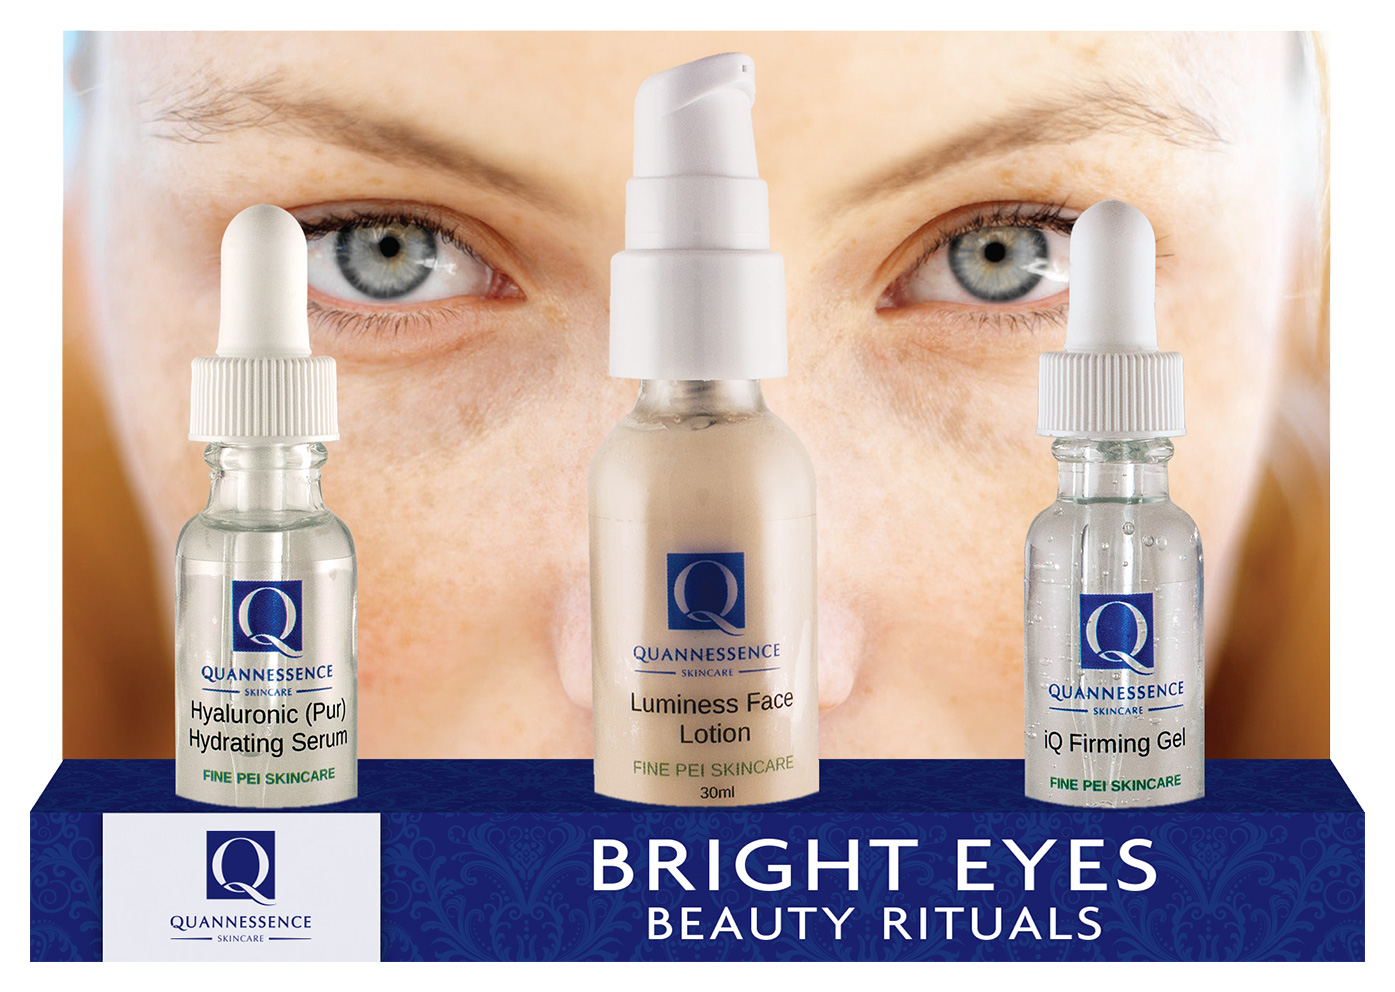 Quannessence Bright Eyes Beauty Rituals (3 Products)